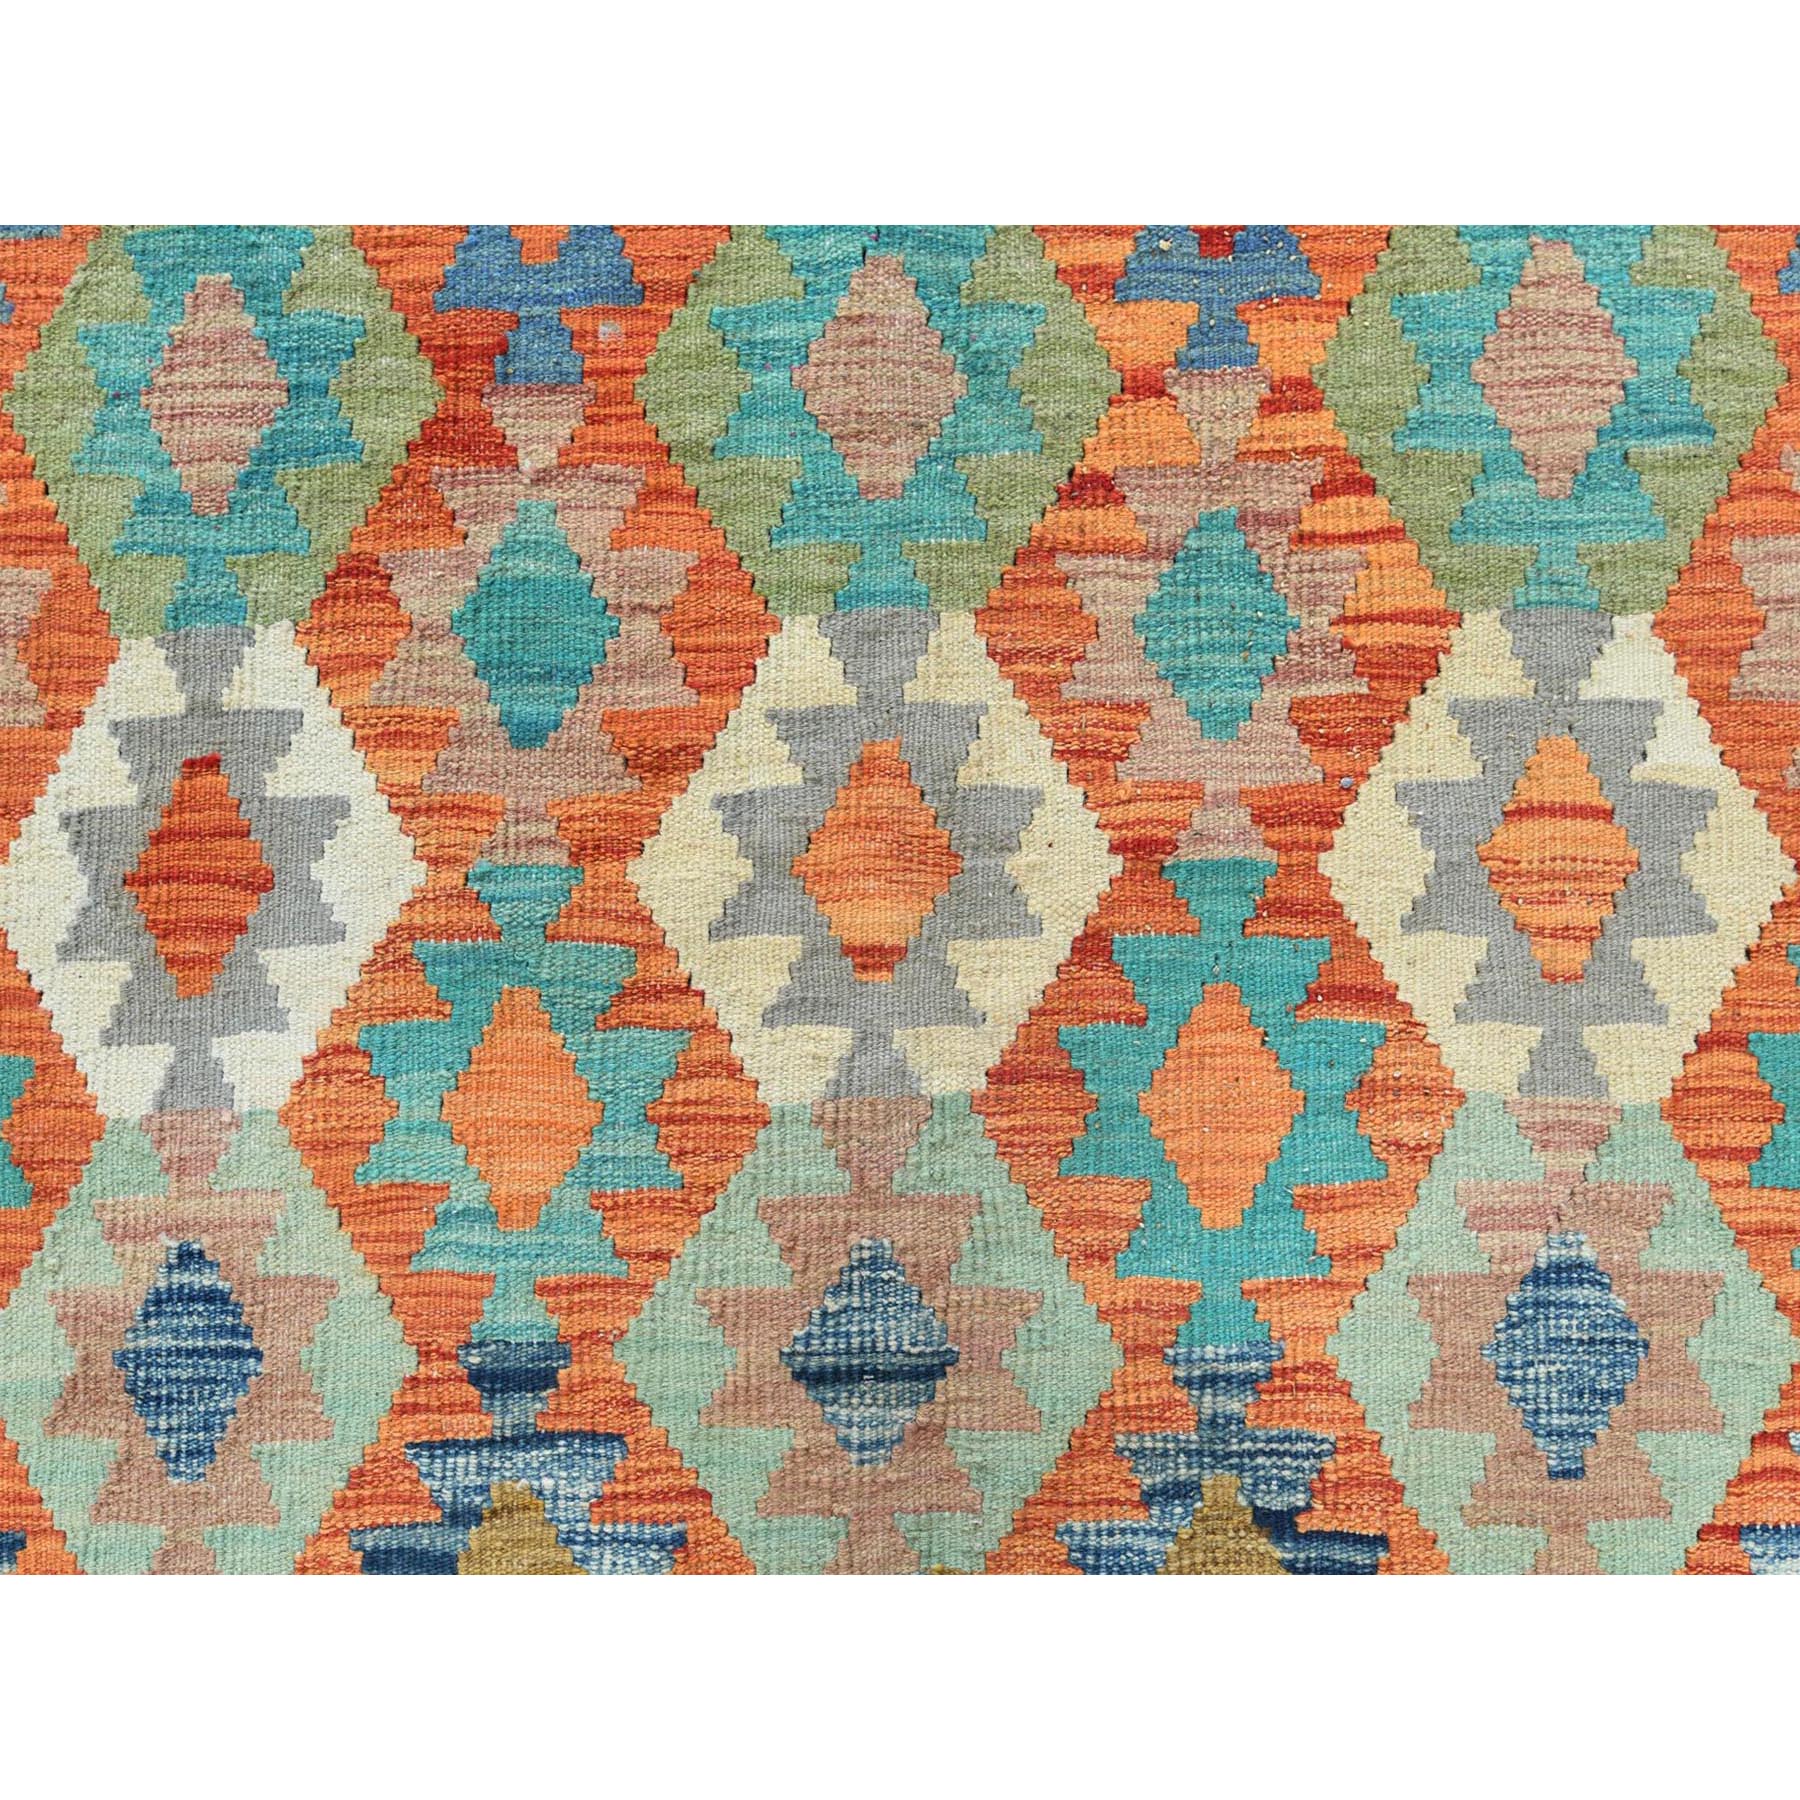 10'4"x16'1" Colorful, Hand Woven Afghan Kilim with Geometric Design, Flat Weave Veggie Dyes Organic Wool, Reversible Oversized Oriental Rug 